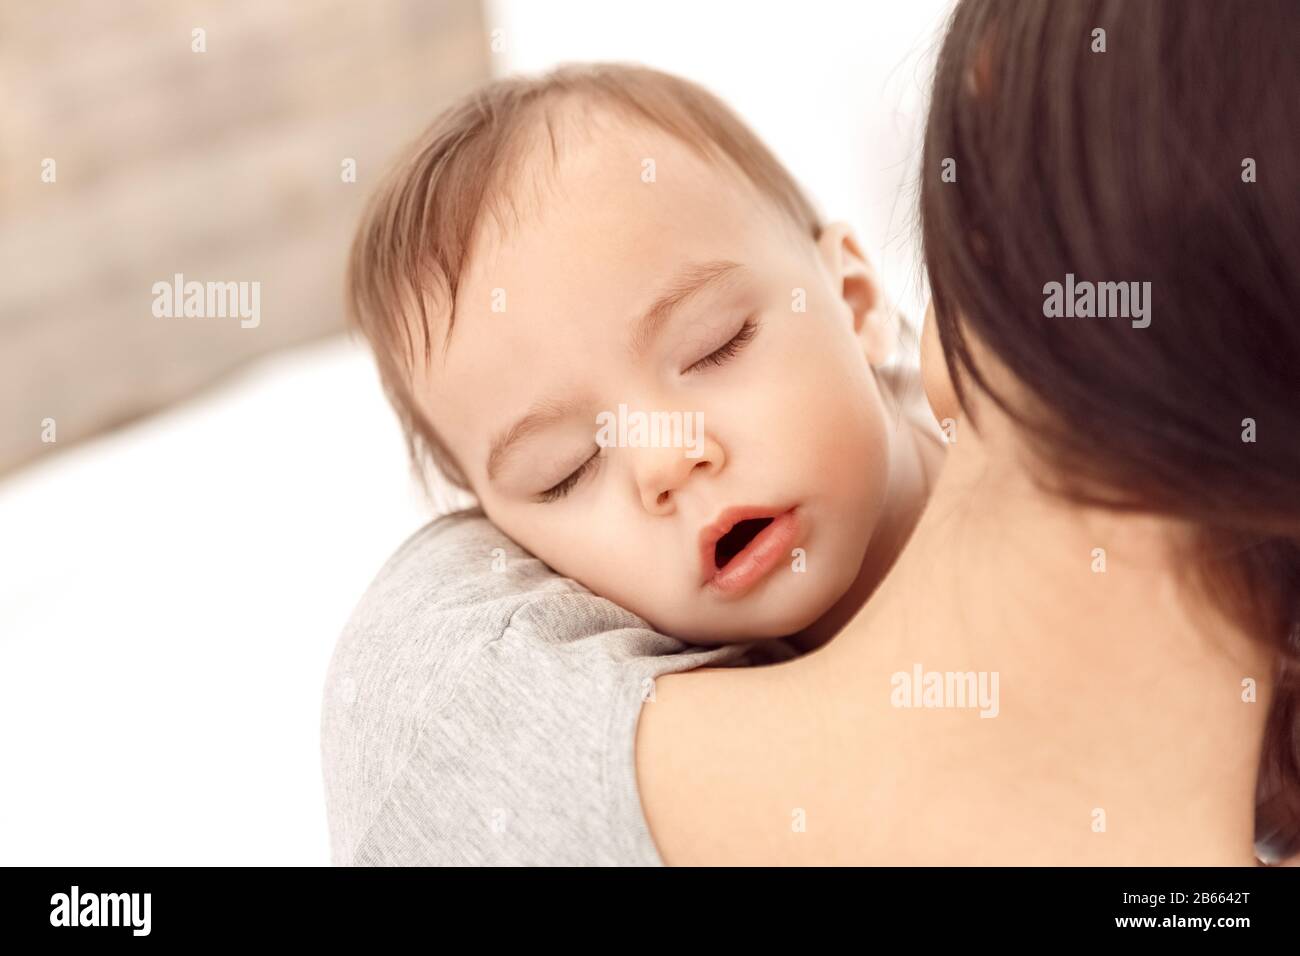 Motherhood. Mother holding adorable sleeping baby close-up at home back view Stock Photo